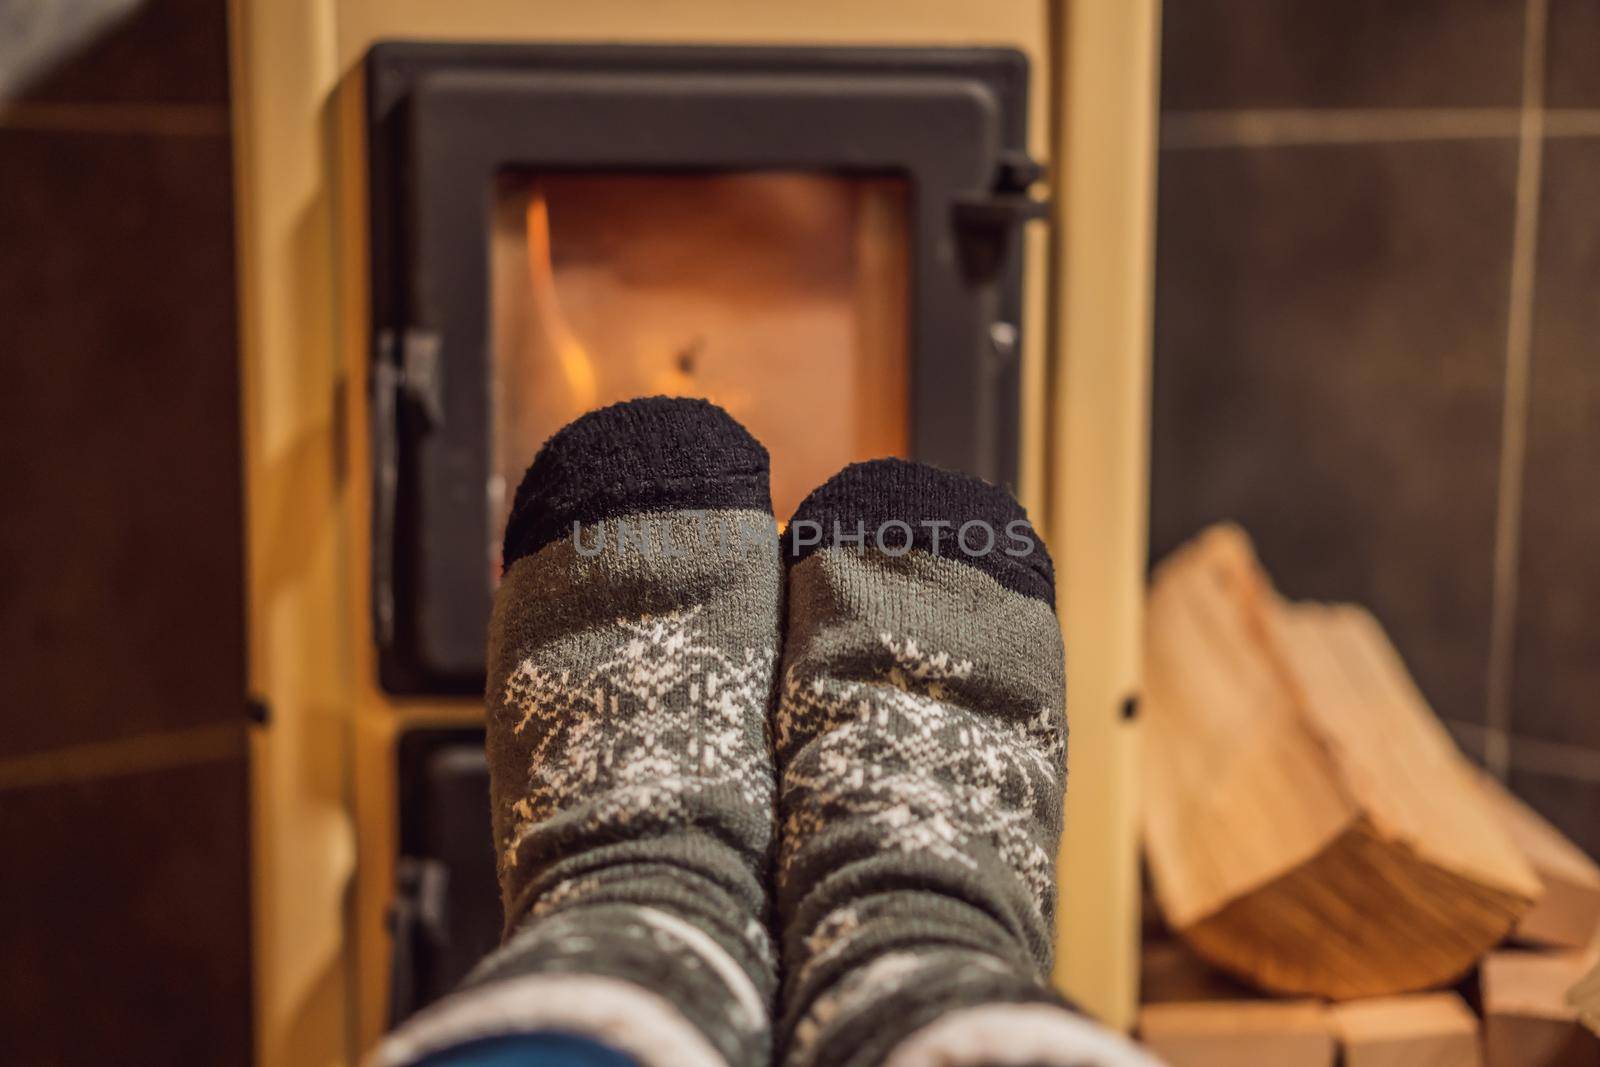 Feet in winter socks are heated by the fireplace. Rest in the mountains in Glamping. Cozy fireplace in a mountain house.